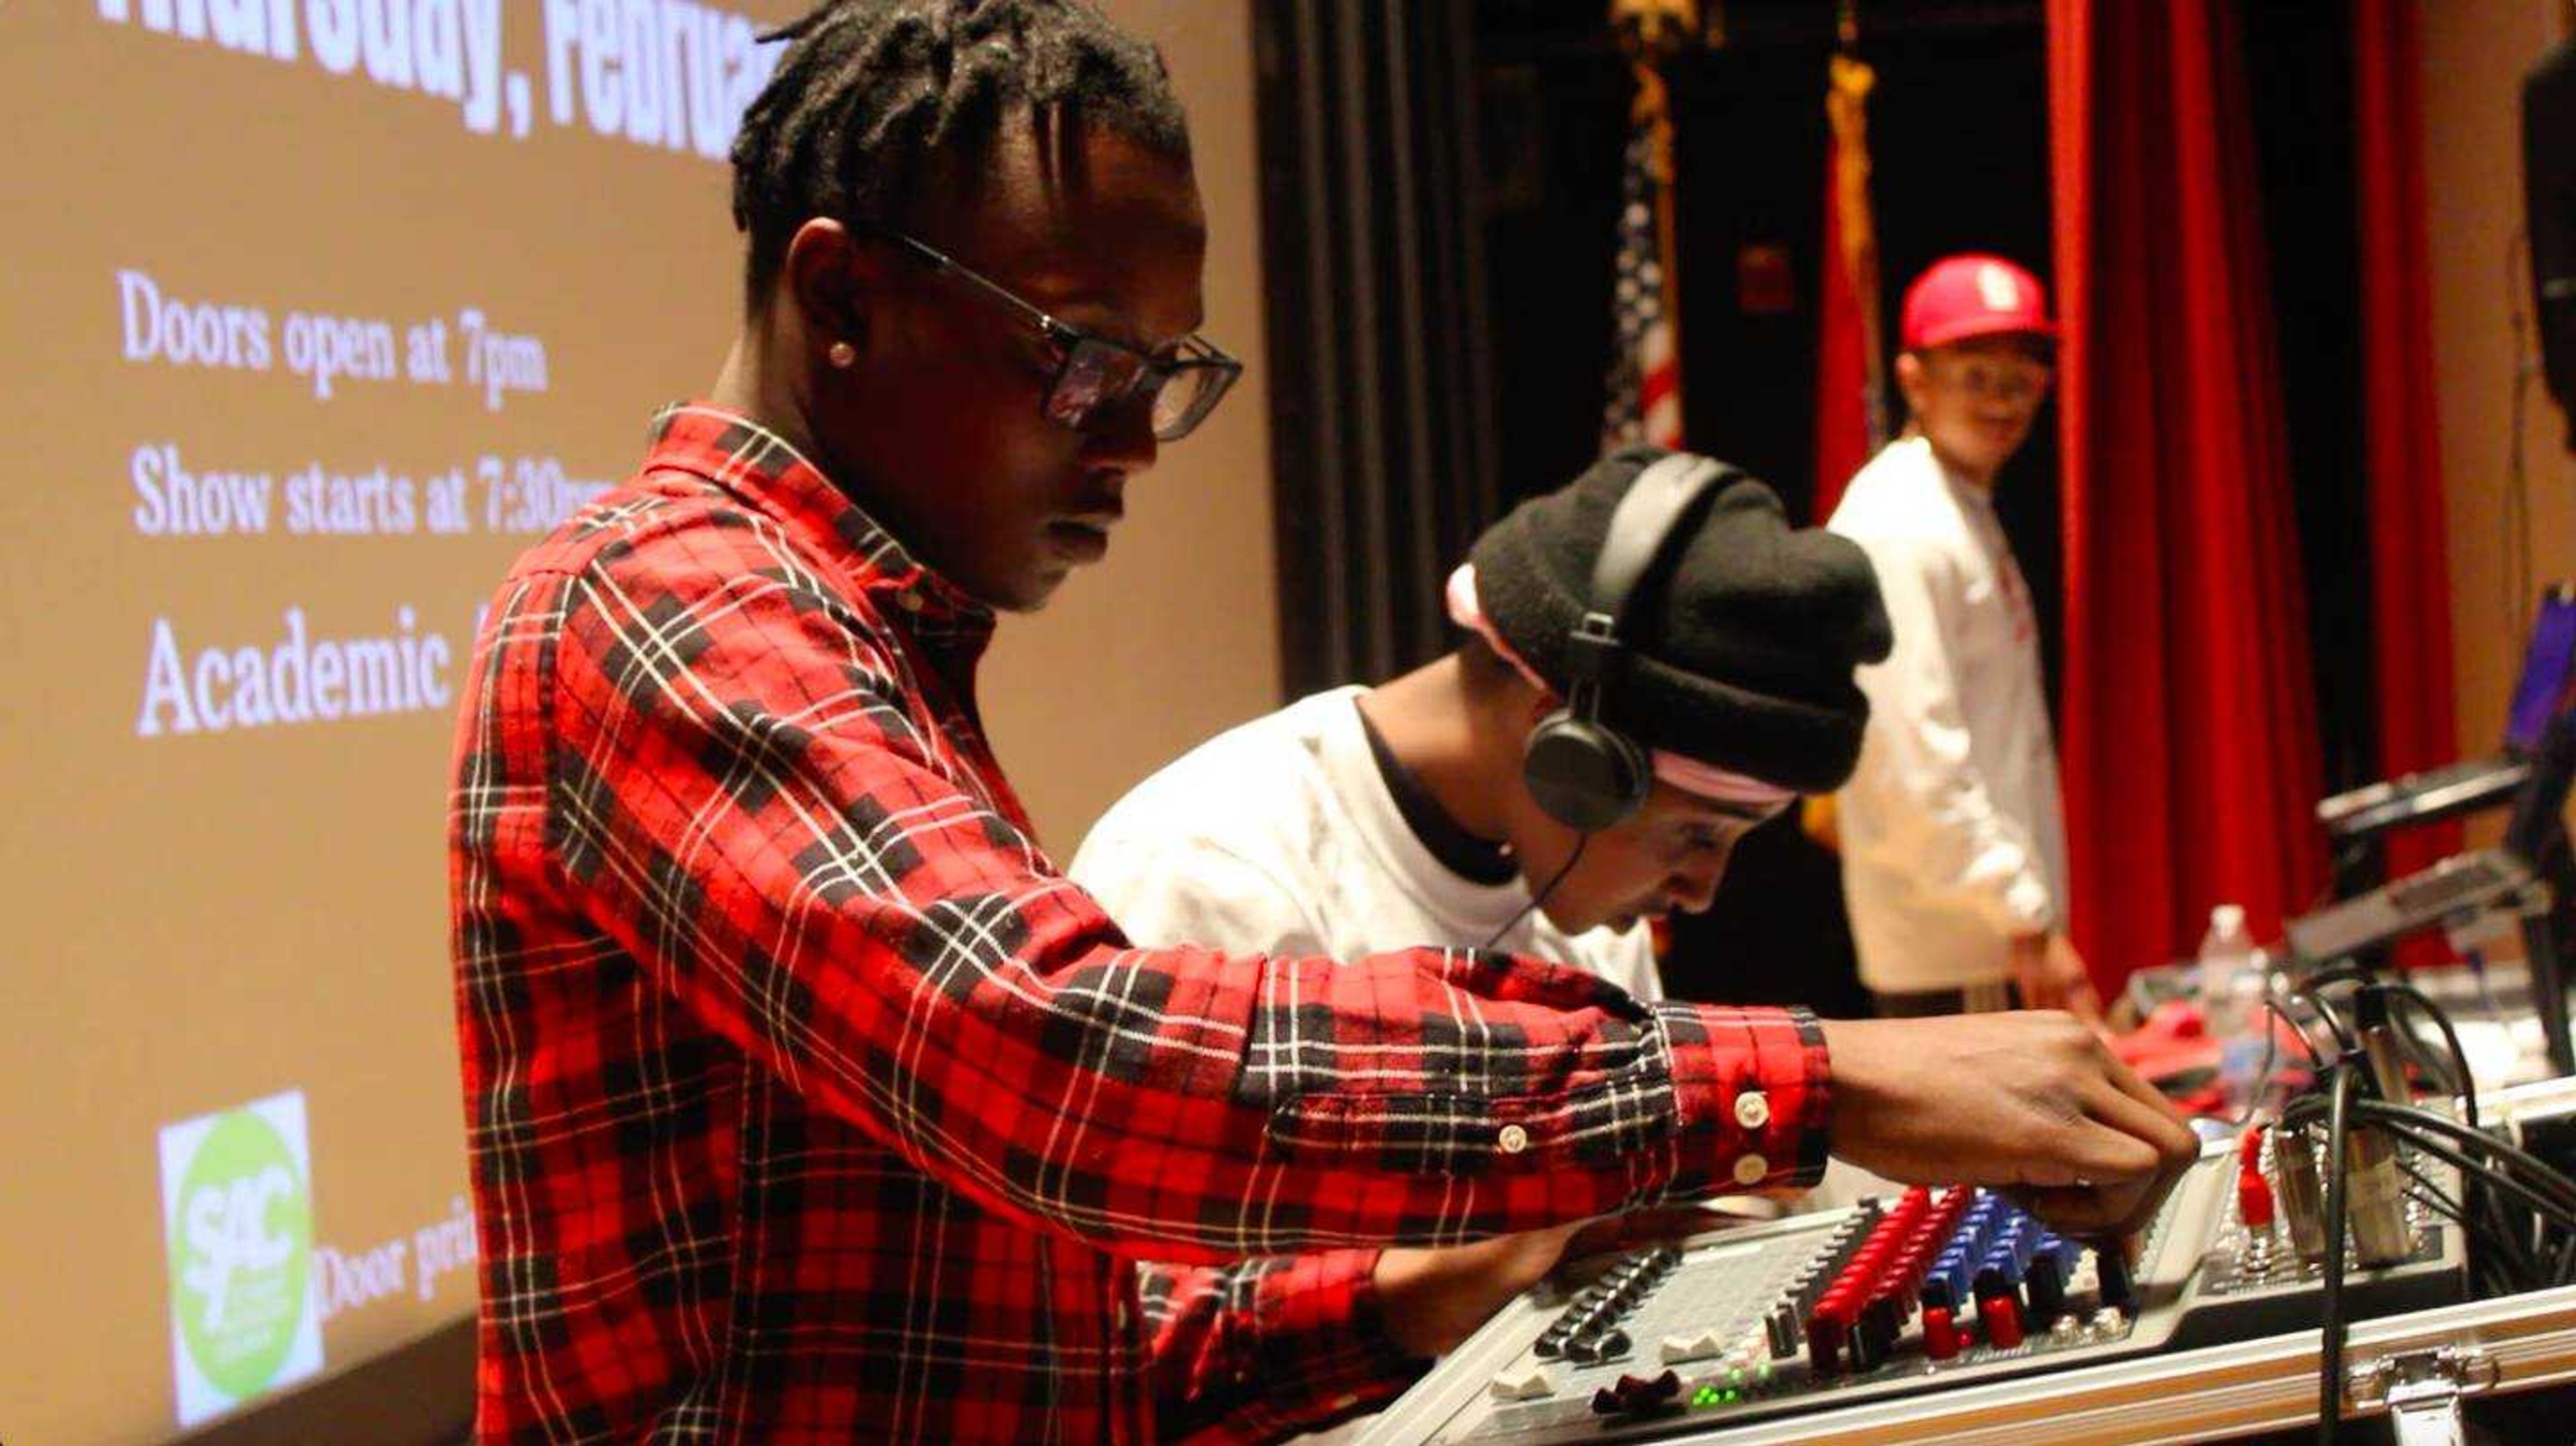 DJ Knowledge working the soundboard at the Battle of the DJ event on Feb. 6 in Academic Hall.